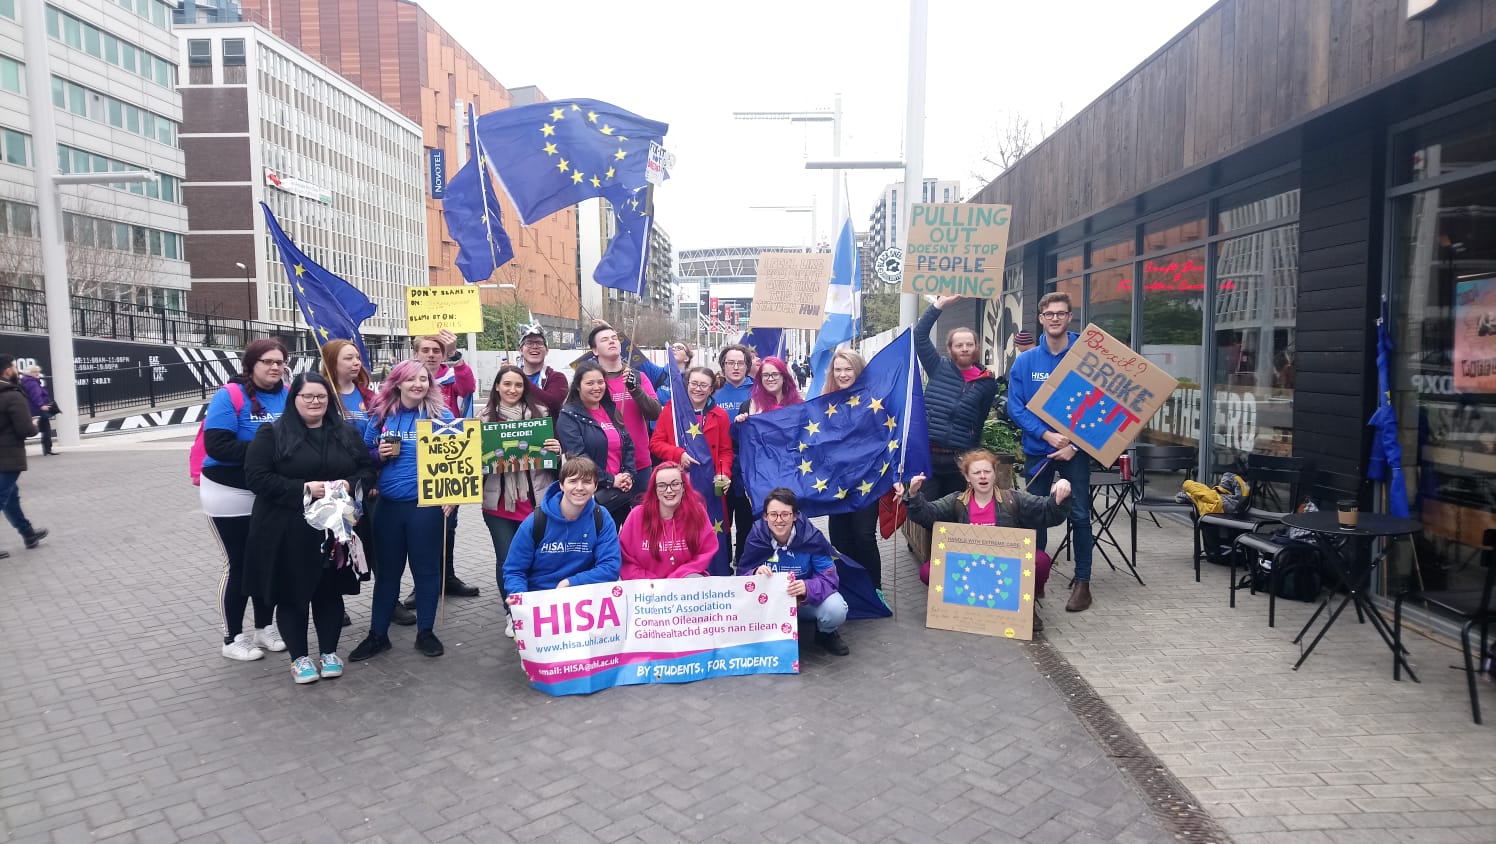 Highlands and Islands Student Association (HISA) students who previously took part in the Peoples Vote march